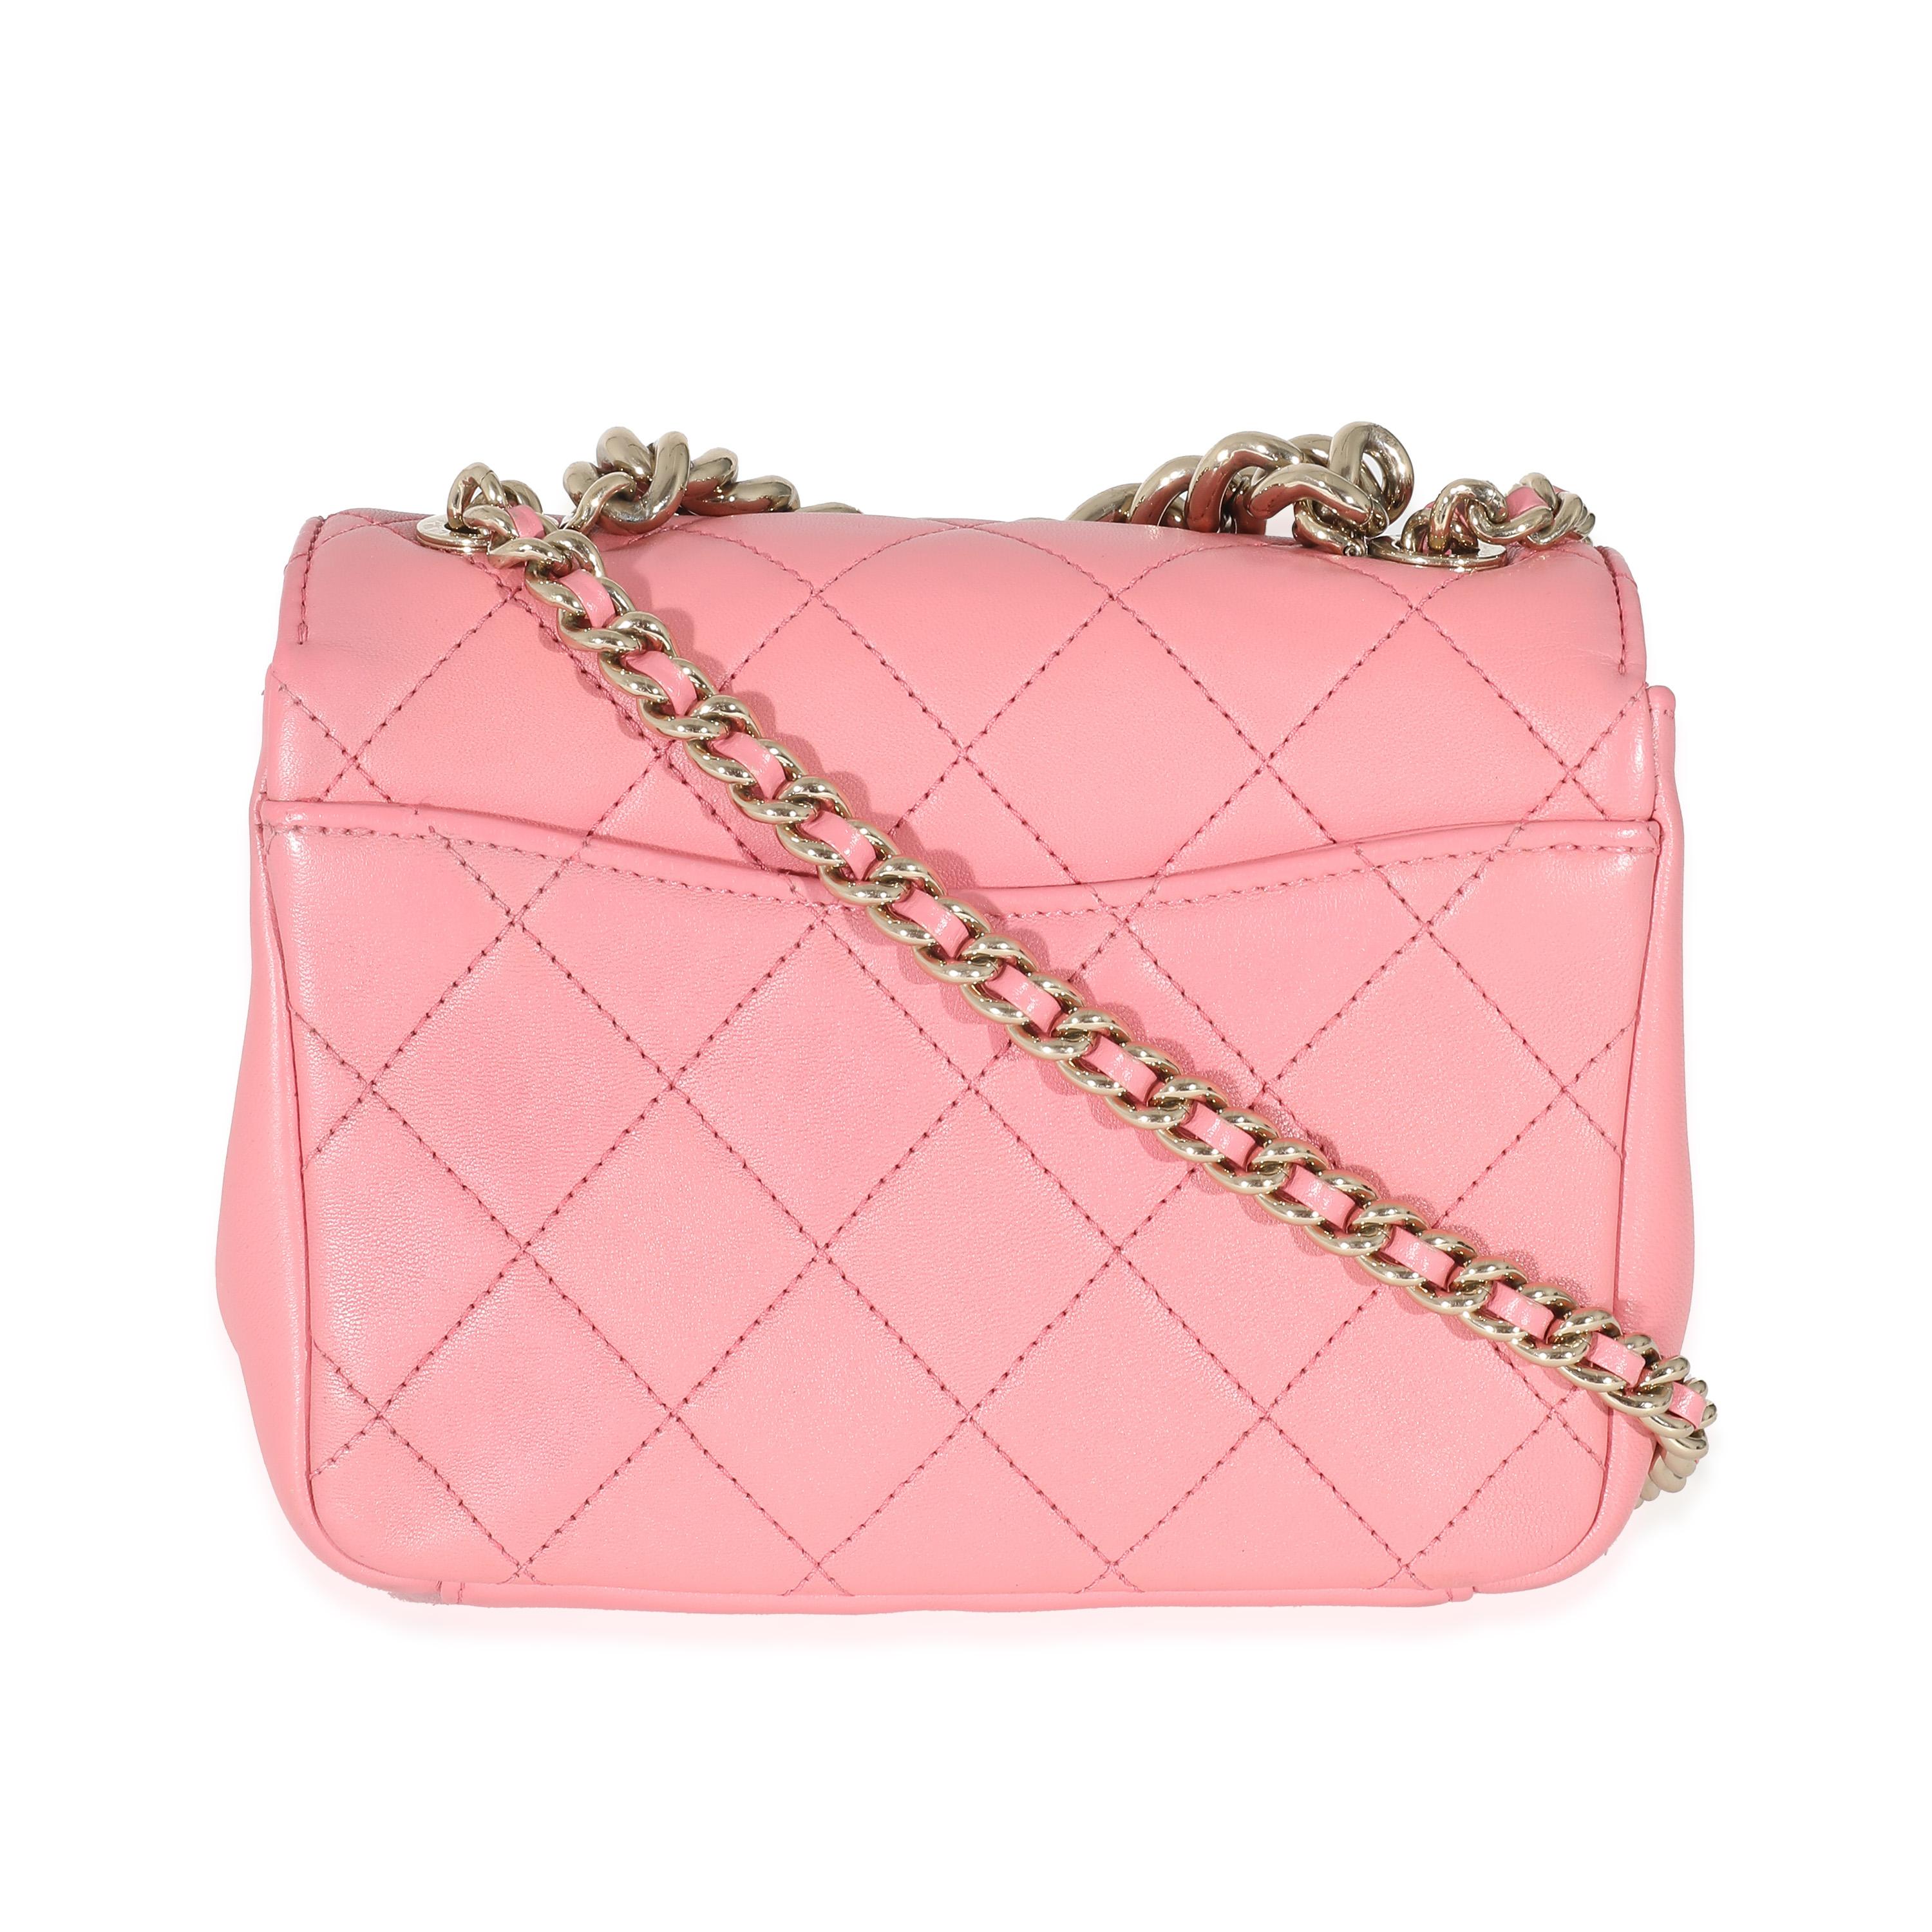 Listing Title: Chanel Pink Quilted Calfskin Beauty Begins Flap Bag
SKU: 133457
Condition: Pre-owned 
Handbag Condition: Very Good
Condition Comments: Item is in very good condition with minor signs of wear. Faint scuffing and discoloration along